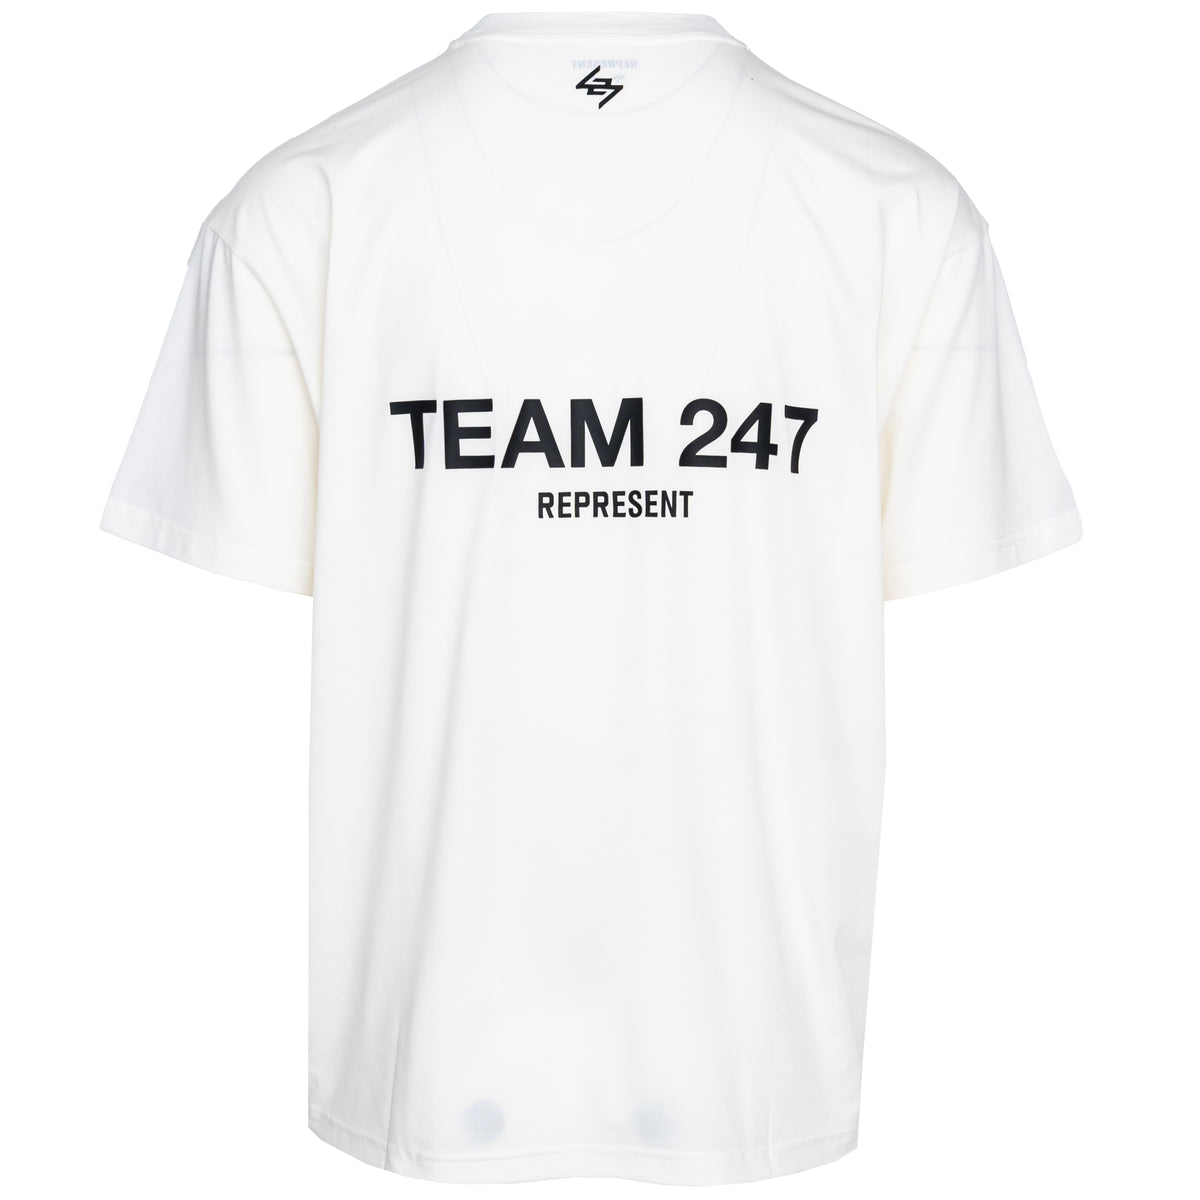 Load image into Gallery viewer, REPRESENT Flat White Team 247 Oversize Tee
